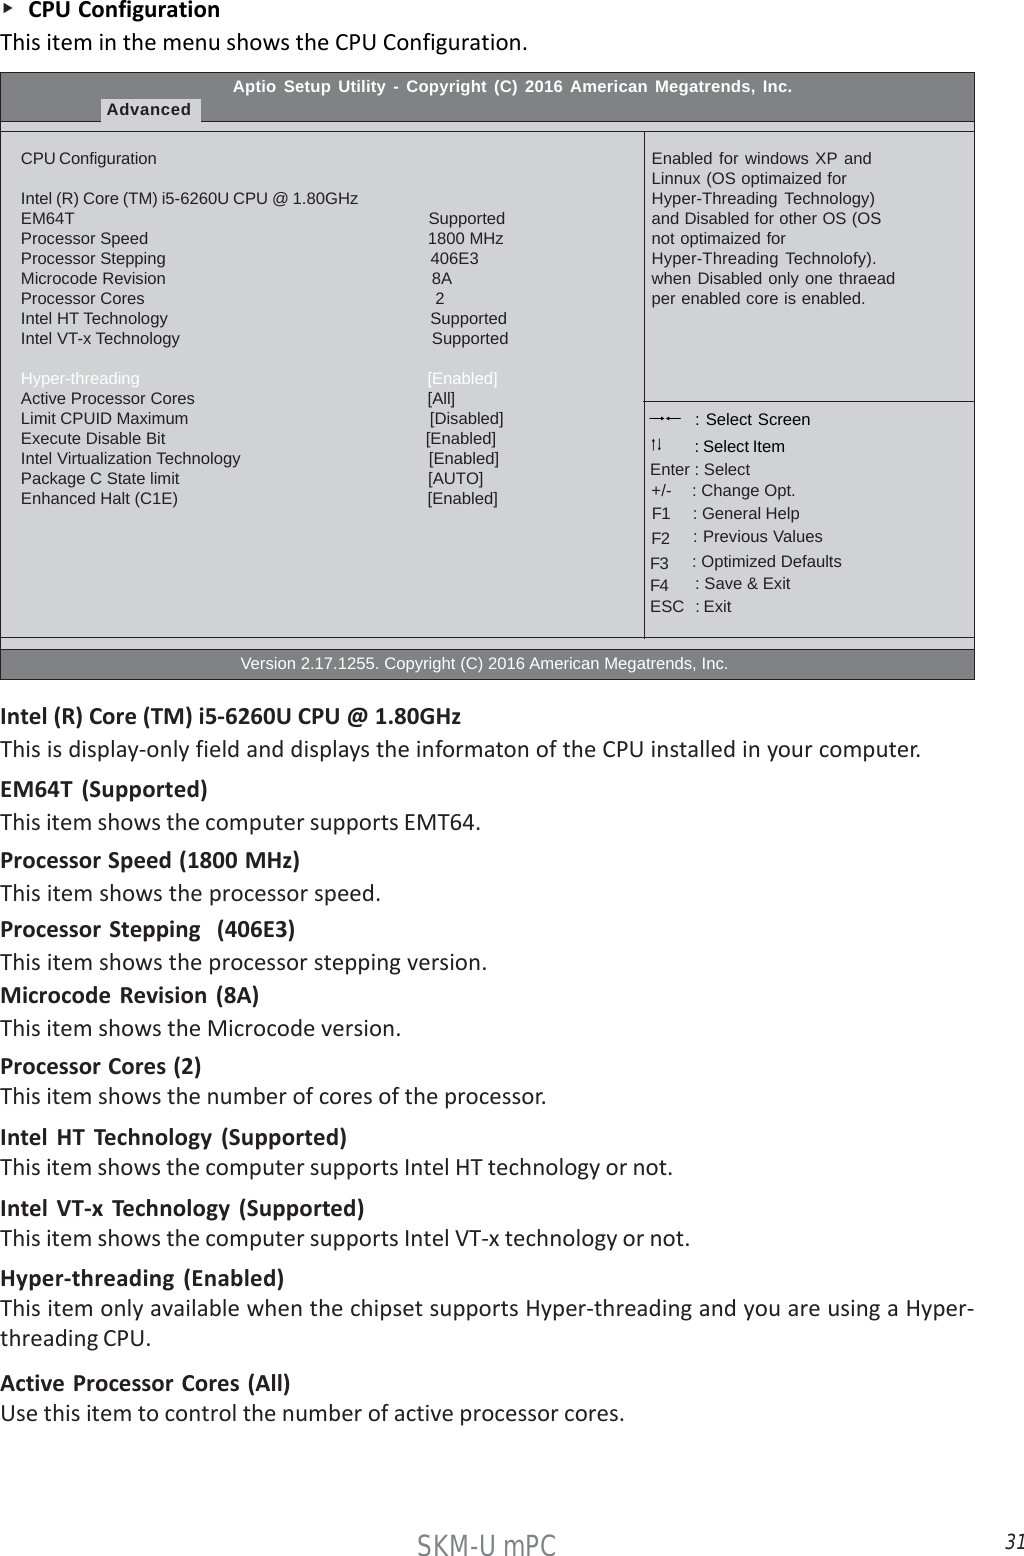 31SKM-U mPC    CPU ConfigurationThis item in the menu shows the CPU Configuration.Aptio Setup Utility - Copyright (C) 2016 American Megatrends, Inc.AdvancedCPU ConfigurationIntel (R) Core (TM) i5-6260U CPU @ 1.80GHzEM64T                                                                            SupportedProcessor Speed                                                           1800 MHzProcessor Stepping                                                        406E3Microcode Revision                                                        8AProcessor Cores                                                             2Intel HT Technology                                                        SupportedIntel VT-x Technology                                                     SupportedHyper-threading                                                             [Enabled]Active Processor Cores                                                [All]Limit CPUID Maximum                                                      [Disabled]Execute Disable Bit                                                        [Enabled]Intel Virtualization Technology                                        [Enabled]Package C State limit                                                      [AUTO]Enhanced Halt (C1E)                                                      [Enabled]                                                  Version 2.17.1255. Copyright (C) 2016 American Megatrends, Inc.Enabled for windows XP andLinnux (OS optimaized forHyper-Threading Technology)and Disabled for other OS (OSnot optimaized forHyper-Threading Technolofy).when Disabled only one thraeadper enabled core is enabled. : Select Screen    : General Help      : Change Opt.Enter : Select : Select Item   : Previous Values    : Optimized Defaults    : Save &amp; ExitESC   : Exit+/-F1F2F3F4Processor Speed (1800 MHz)This item shows the processor speed.EM64T (Supported)This item shows the computer supports EMT64.Processor Stepping  (406E3)This item shows the processor stepping version.Intel (R) Core (TM) i5-6260U CPU @ 1.80GHzThis is display-only field and displays the informaton of the CPU installed in your computer.Microcode Revision (8A)This item shows the Microcode version.Processor Cores (2)This item shows the number of cores of the processor.Intel HT Technology (Supported)This item shows the computer supports Intel HT technology or not.Intel VT-x Technology (Supported)This item shows the computer supports Intel VT-x technology or not.Hyper-threading (Enabled)This item only available when the chipset supports Hyper-threading and you are using a Hyper-threading CPU.Active Processor Cores (All)Use this item to control the number of active processor cores.